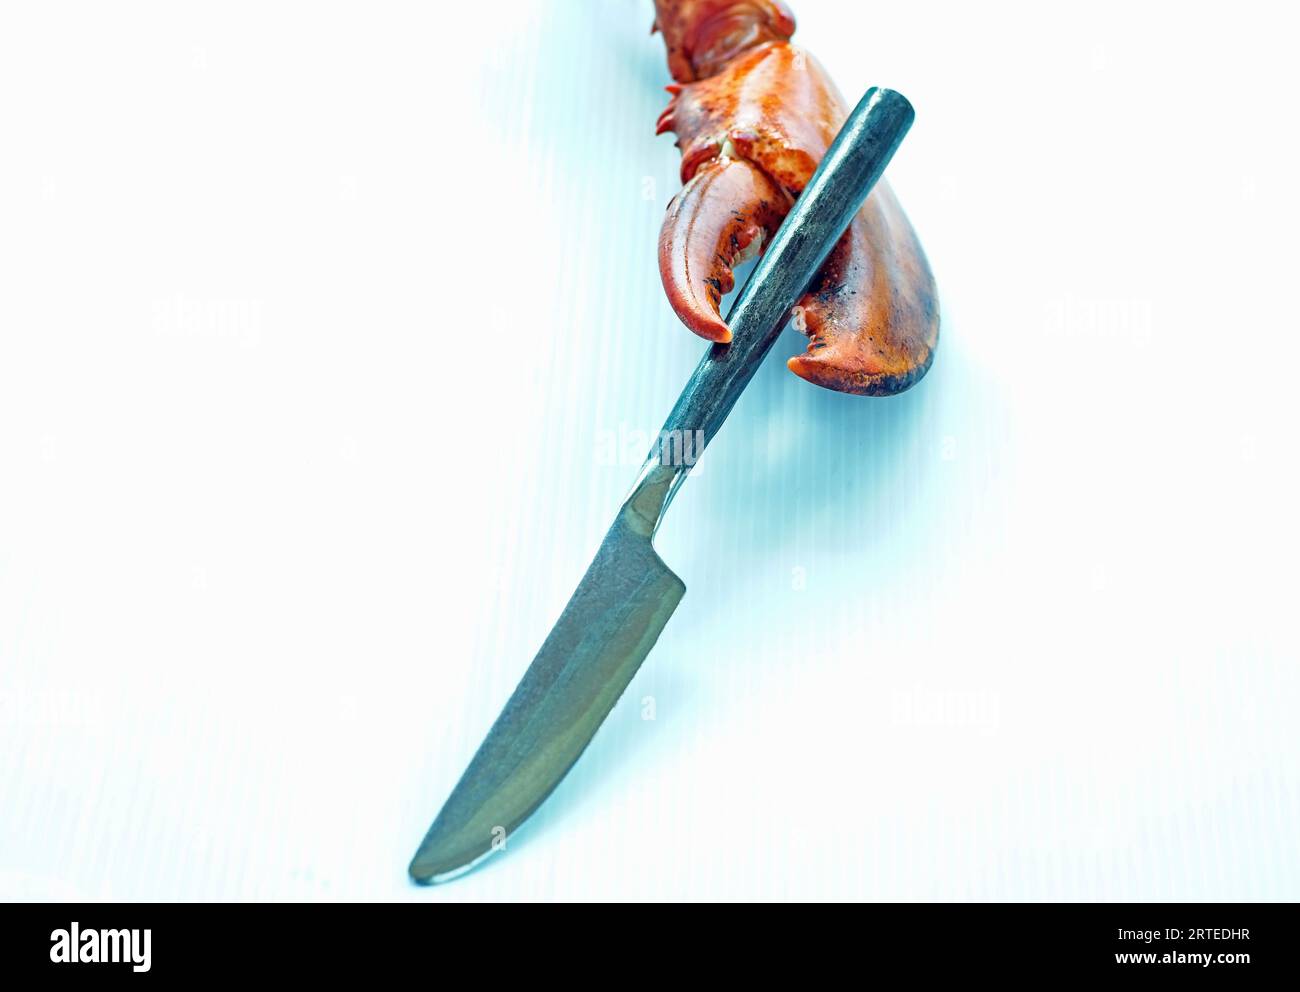 Lobster claw with knife Stock Photo